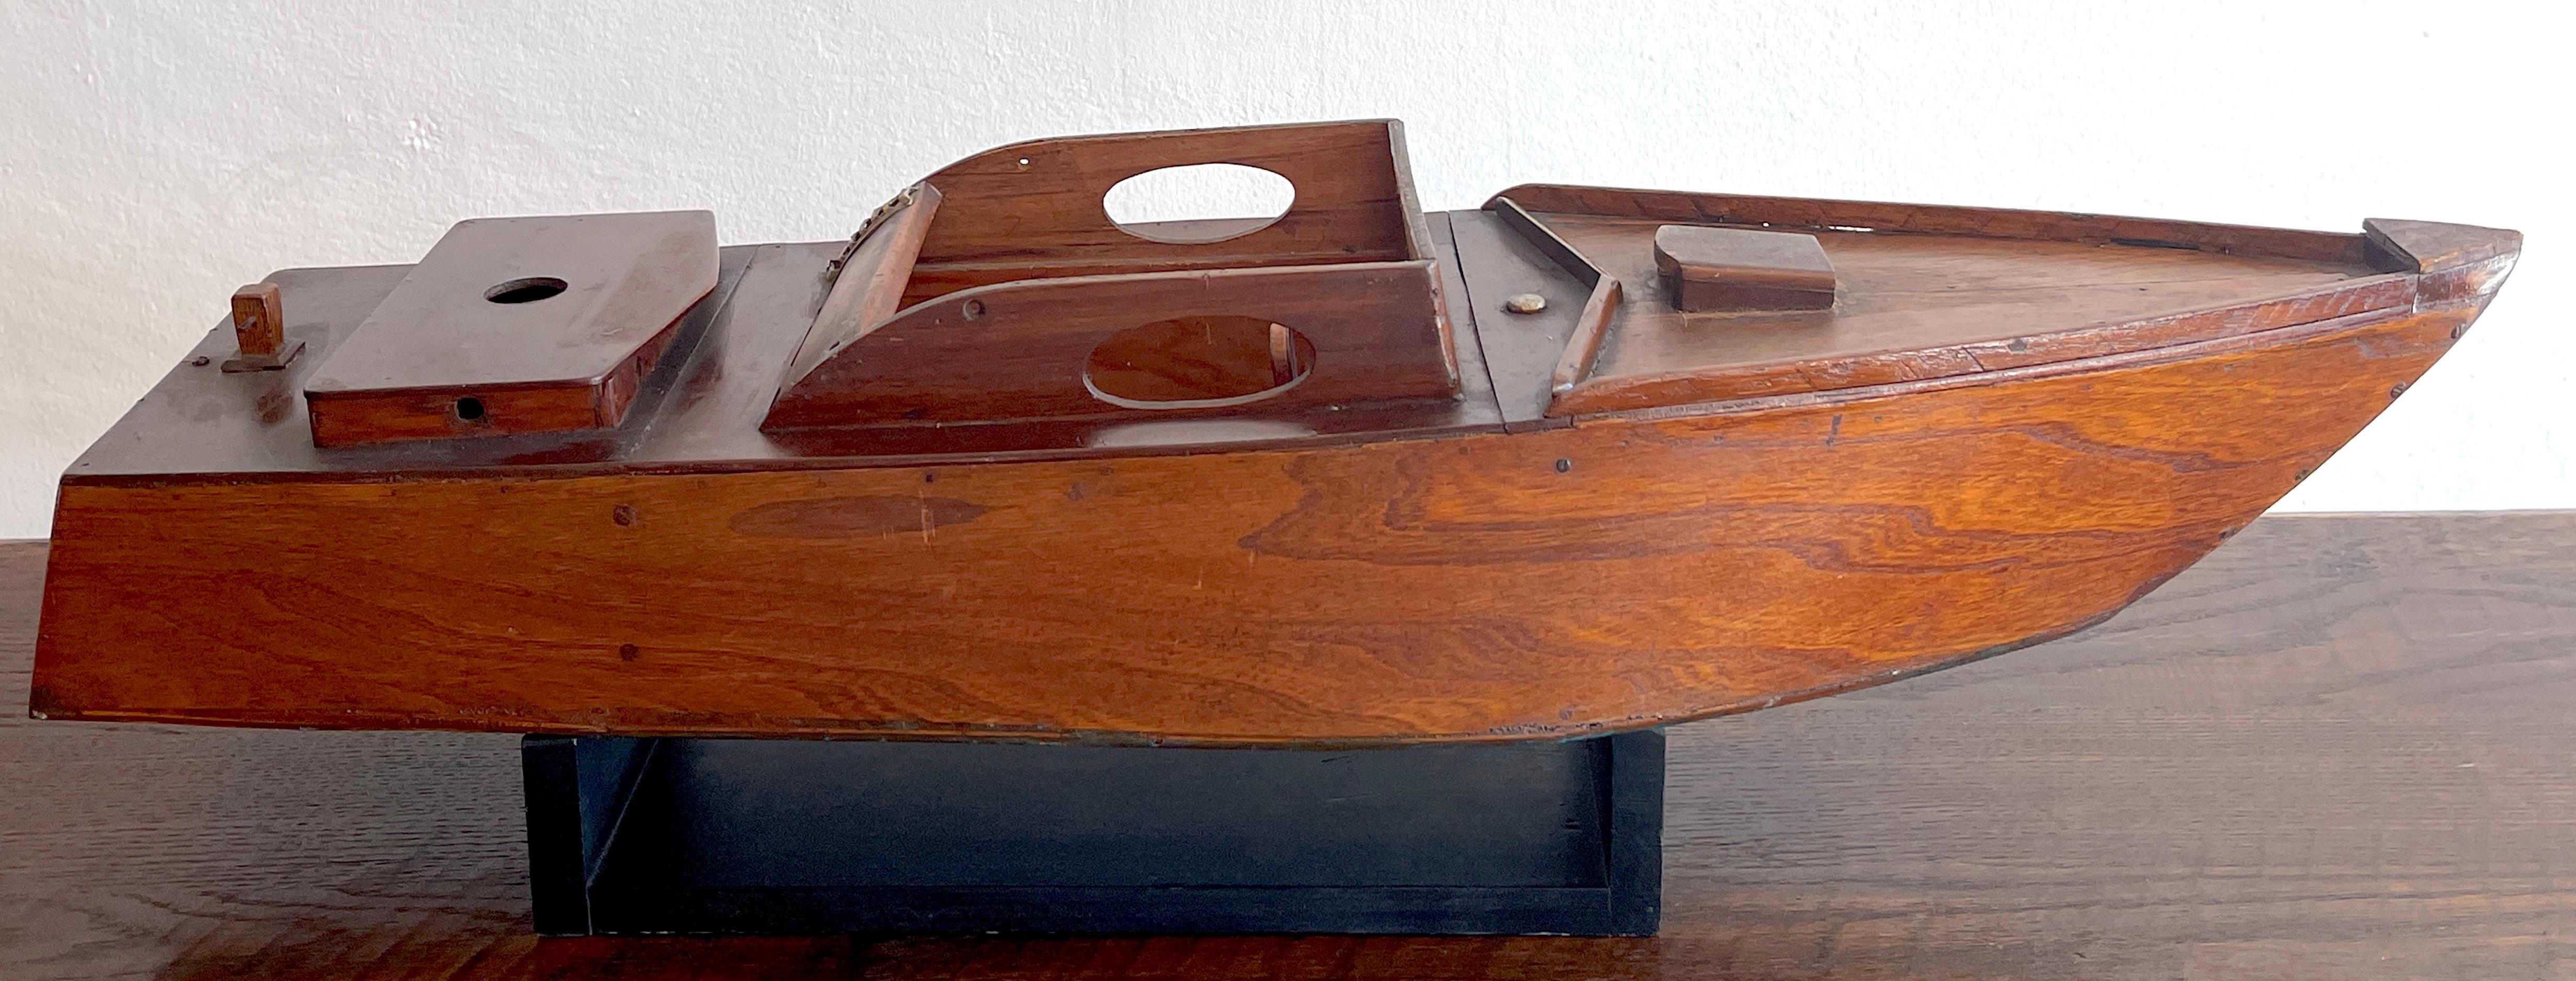 American vintage model of a Speedboat 'Ricky-O' Well crafted in hardwood with numerous details, The stern is inscribed 'Ricky-O' with a blue bottom. Complete with an ebonized display stand. Great color and patina. 
The boat stand measures 15.75